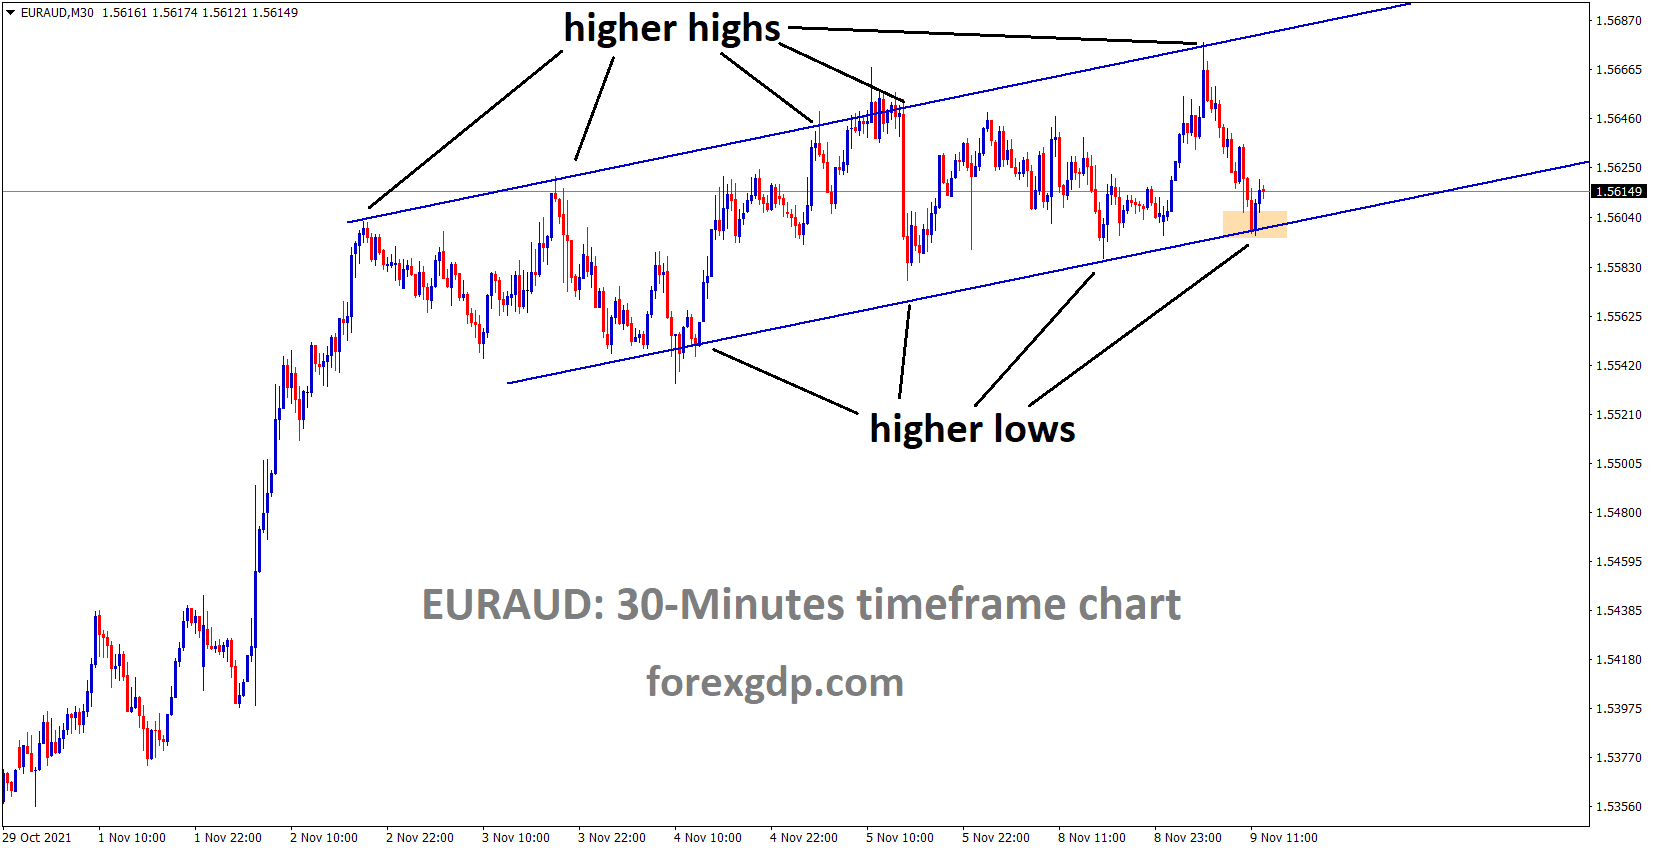 EURAUD is moving in an Ascending channel and the market price is rebounding